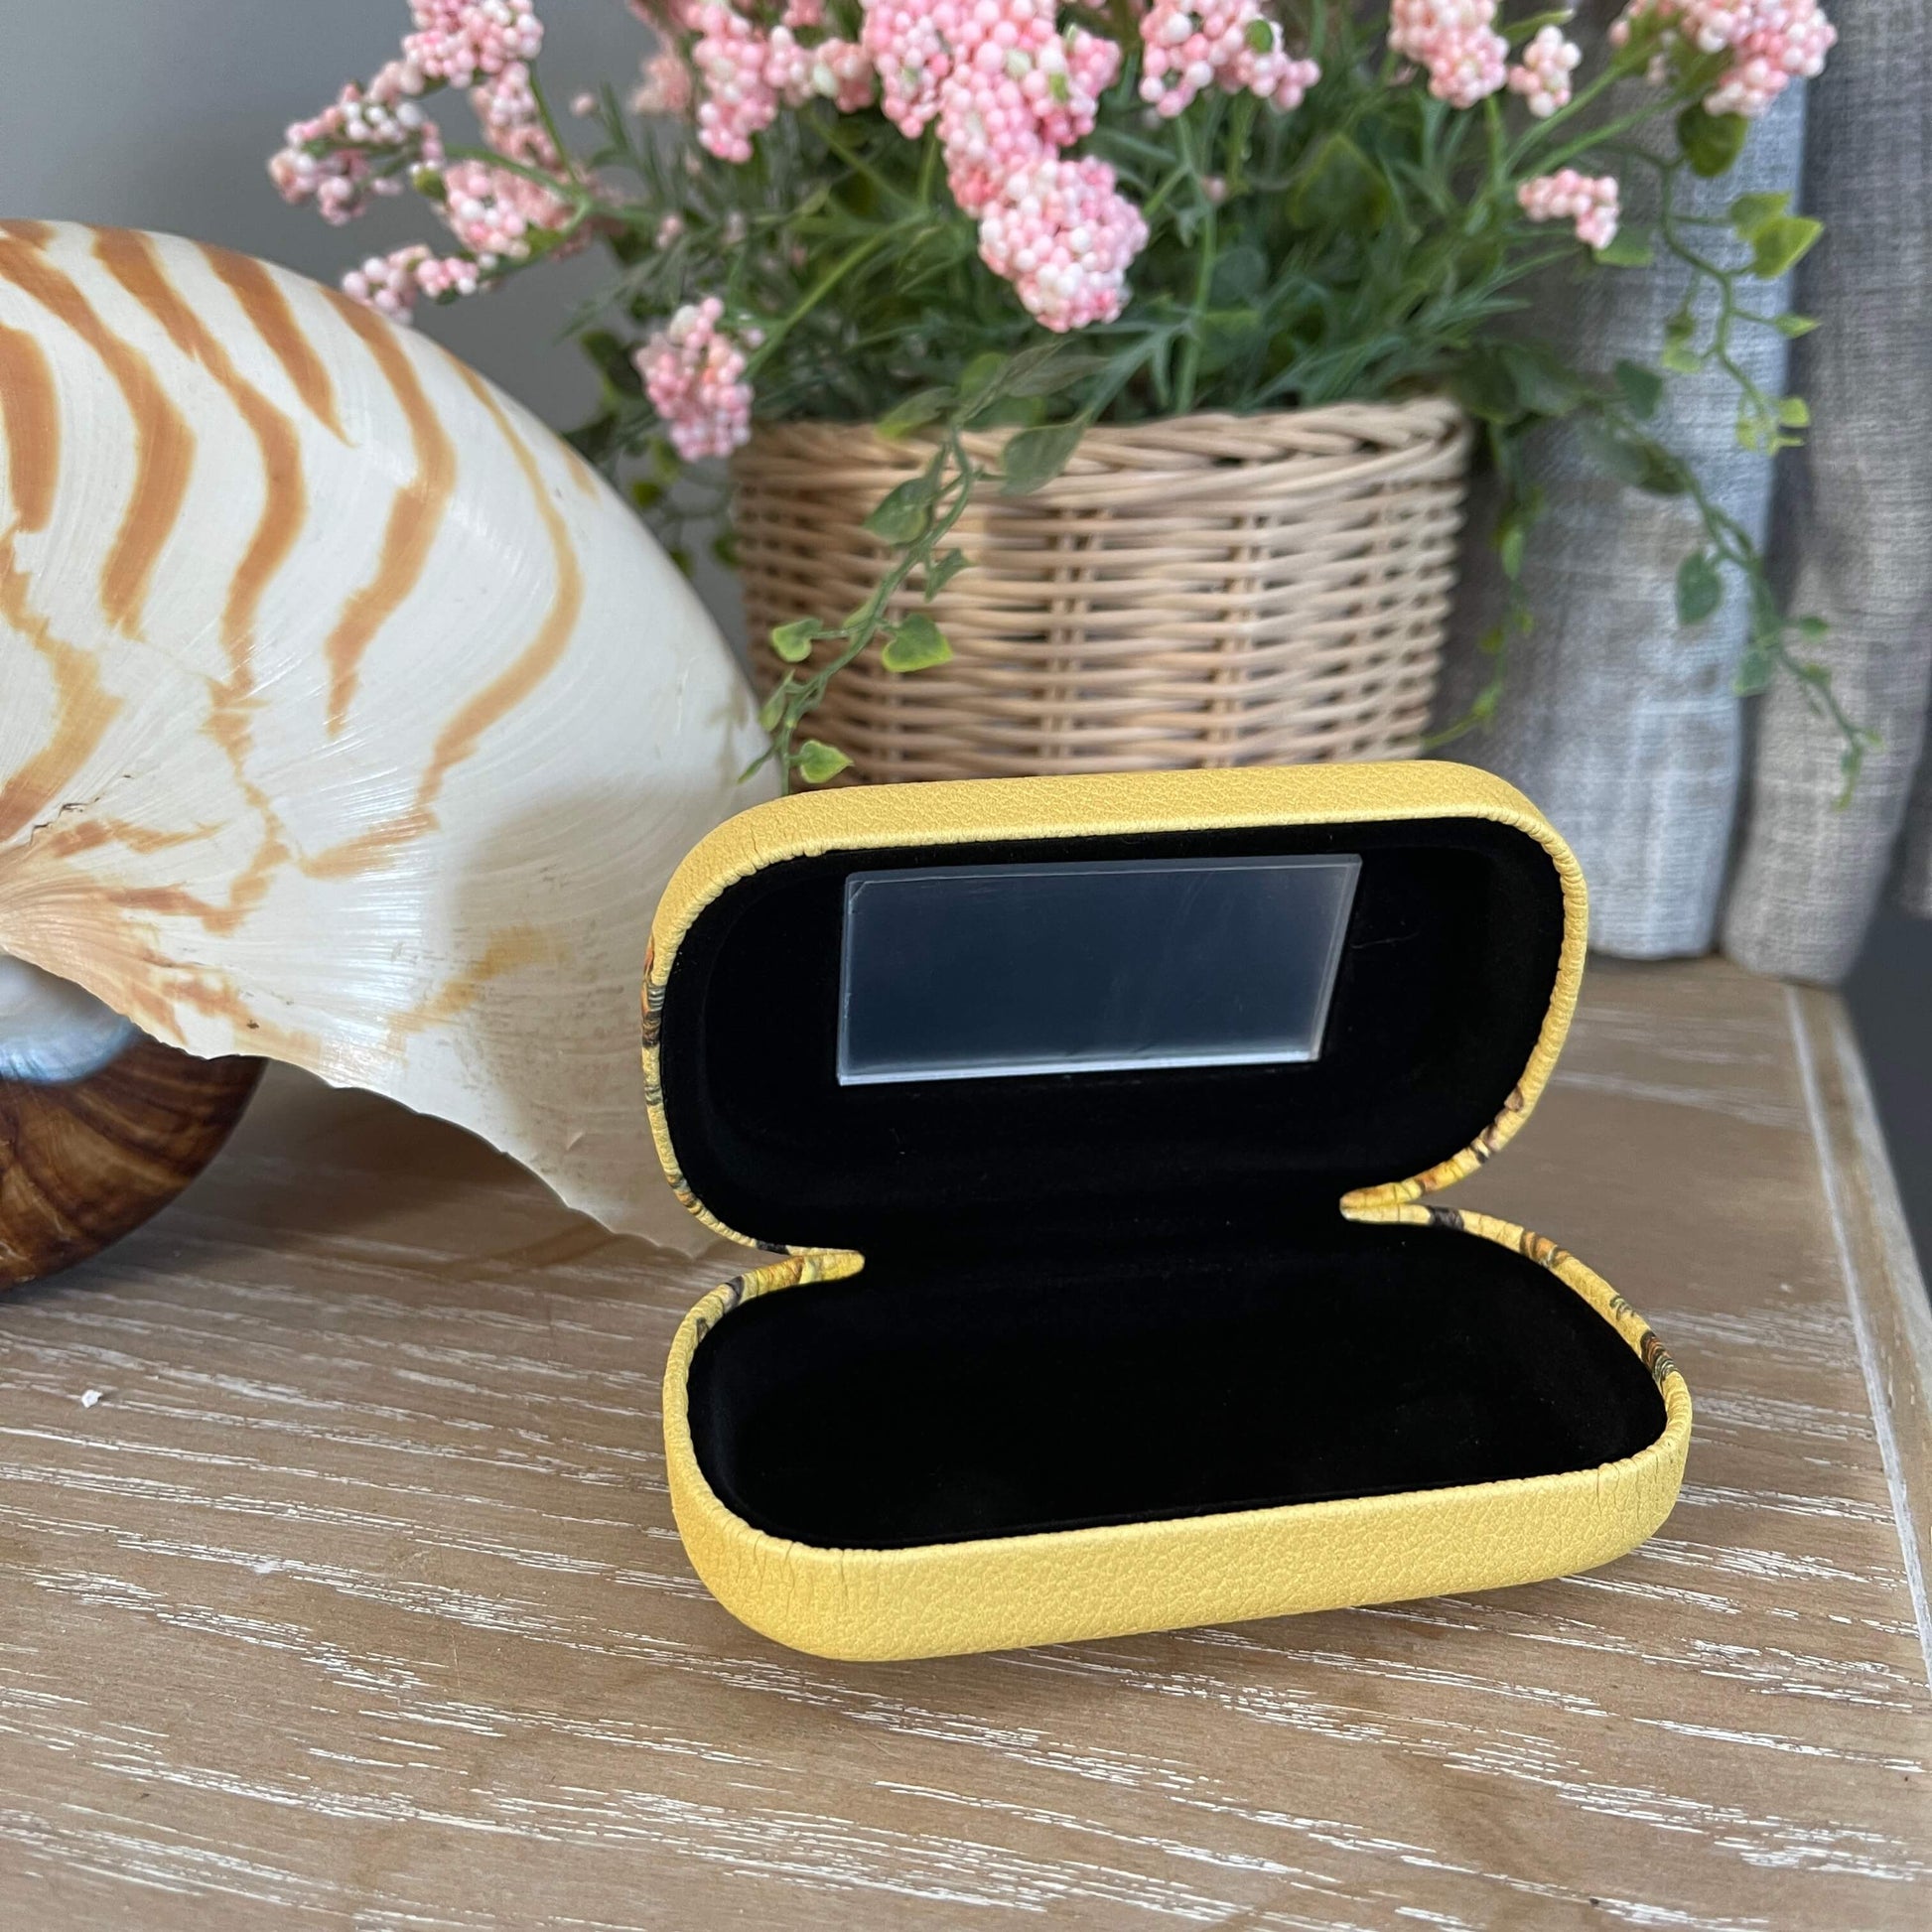 Small trinket case opened showing the mirror and black lining sitting on a table with a large shell and faux pot plant.